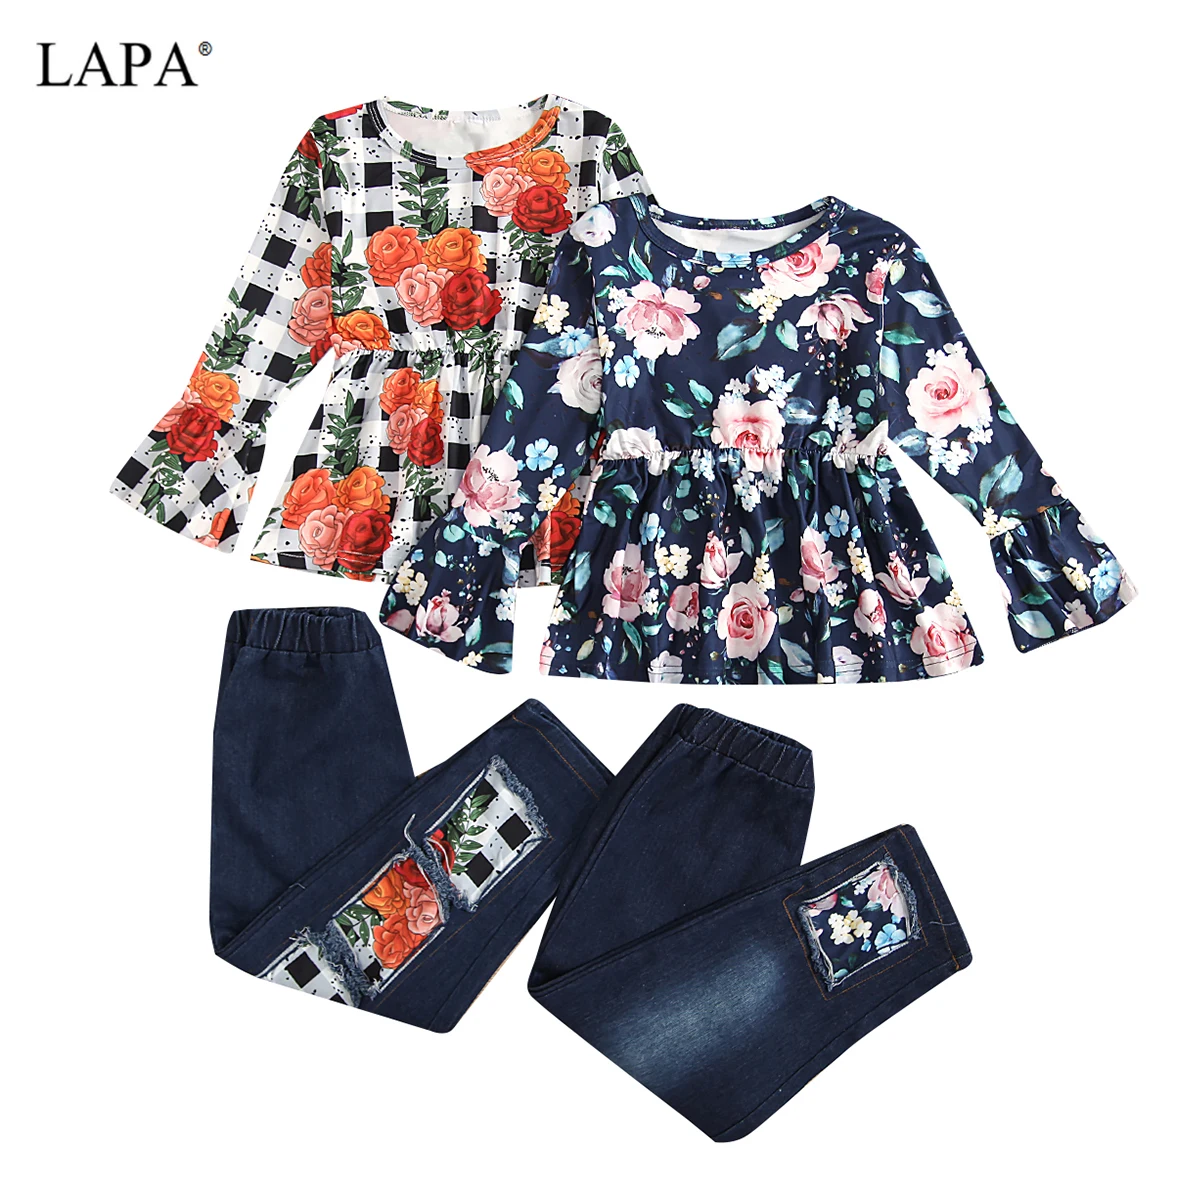 

LAPA Girls Clothes 4 to 12 Years Round Neck Long Sleeve Cotton Pants Set All-Season Floral Flared Sleeve Outfits Jeans Set